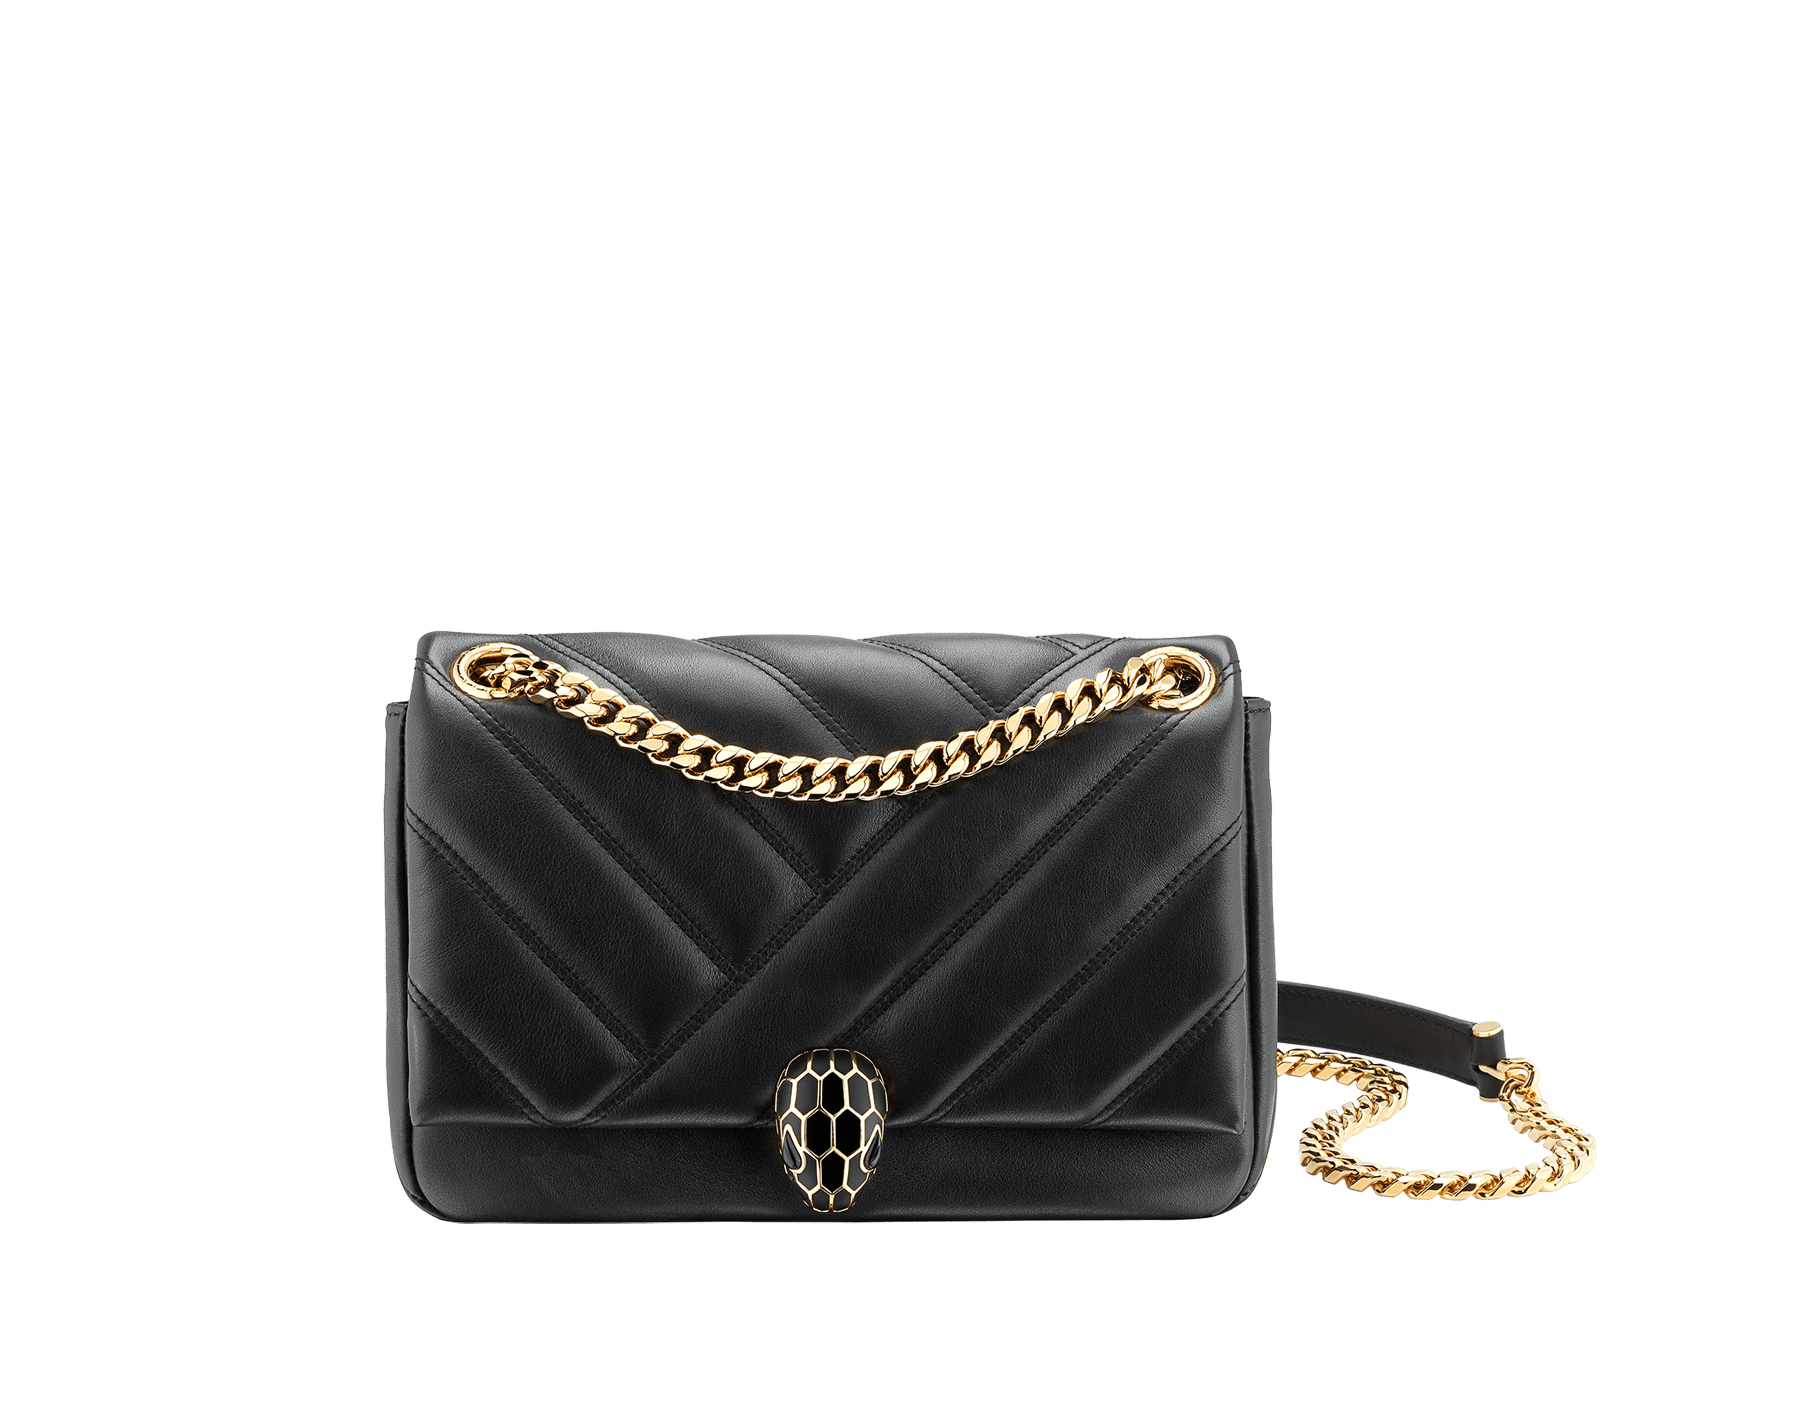 Serpenti Cabochon small shoulder bag in white agate soft matelassé calf leather with black nappa leather lining. Captivating snakehead closure in light gold-plated brass embellished with shiny black and white agate enamel scales and black onyx eyes. 1094-NSM image 1